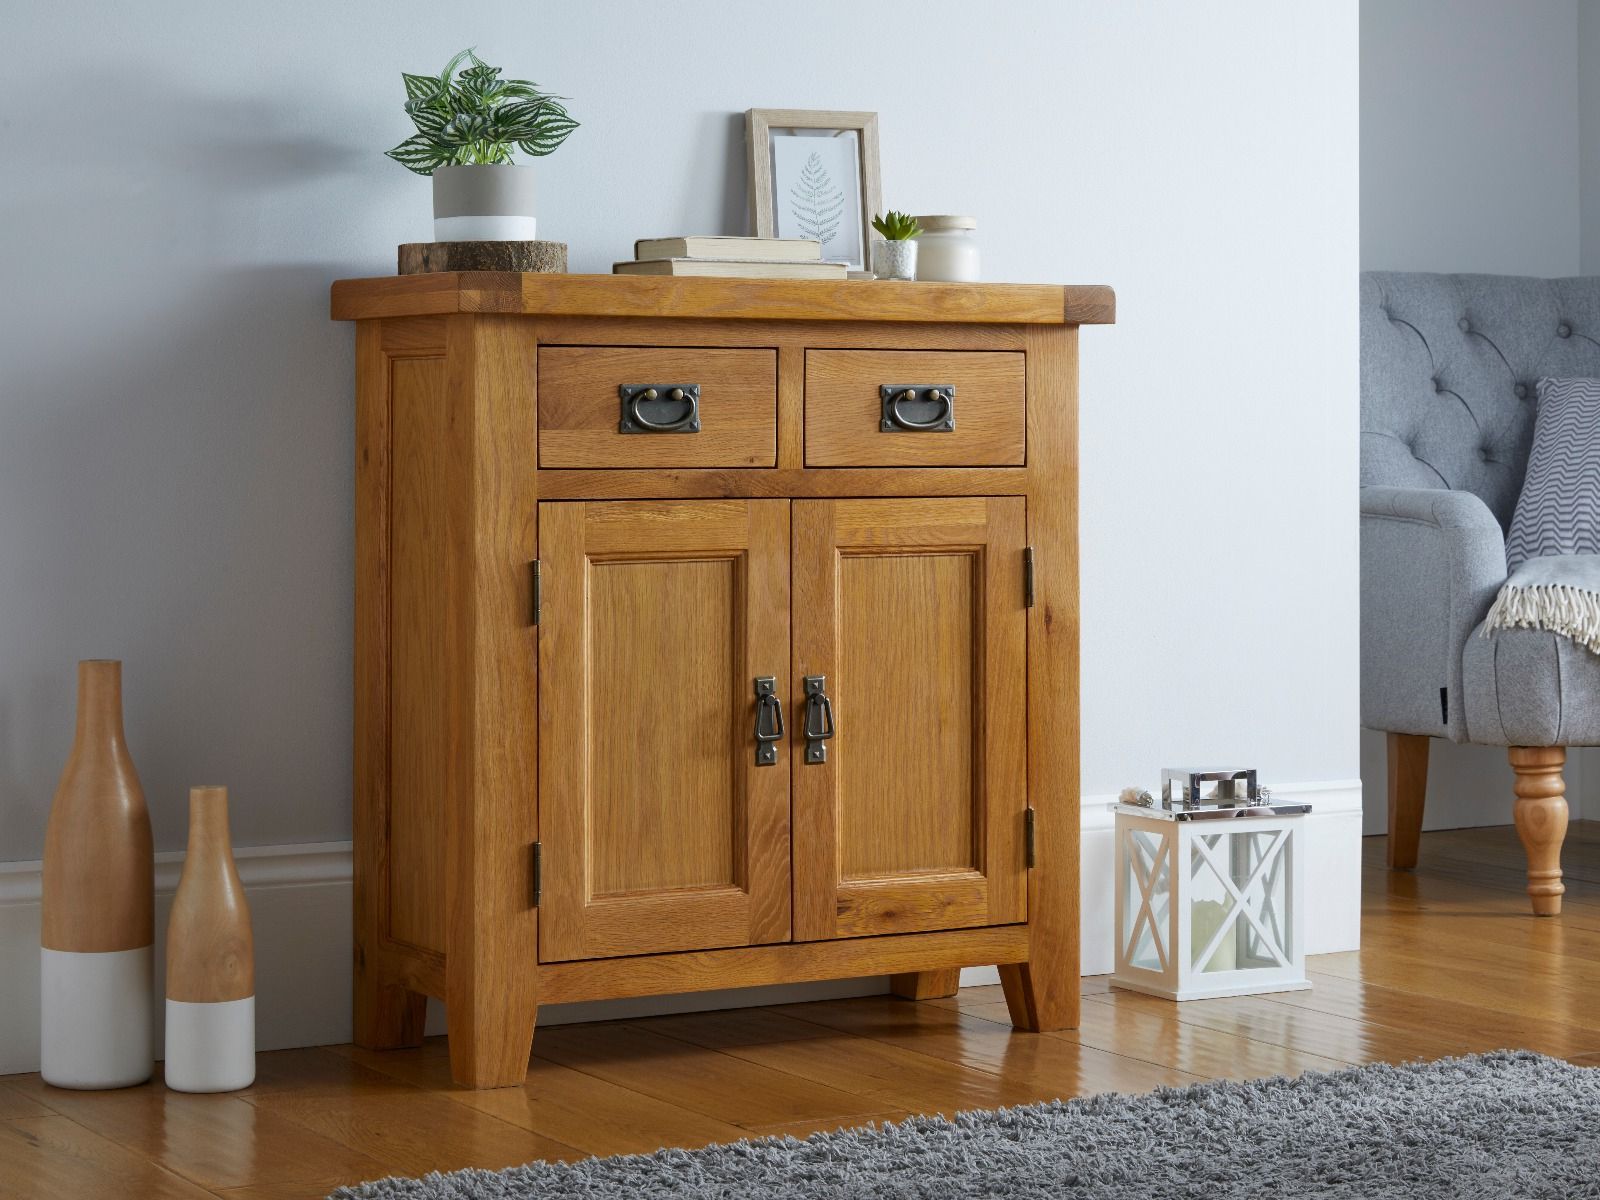 Top Furniture Intended For Rustic Oak Sideboards (Photo 10 of 10)